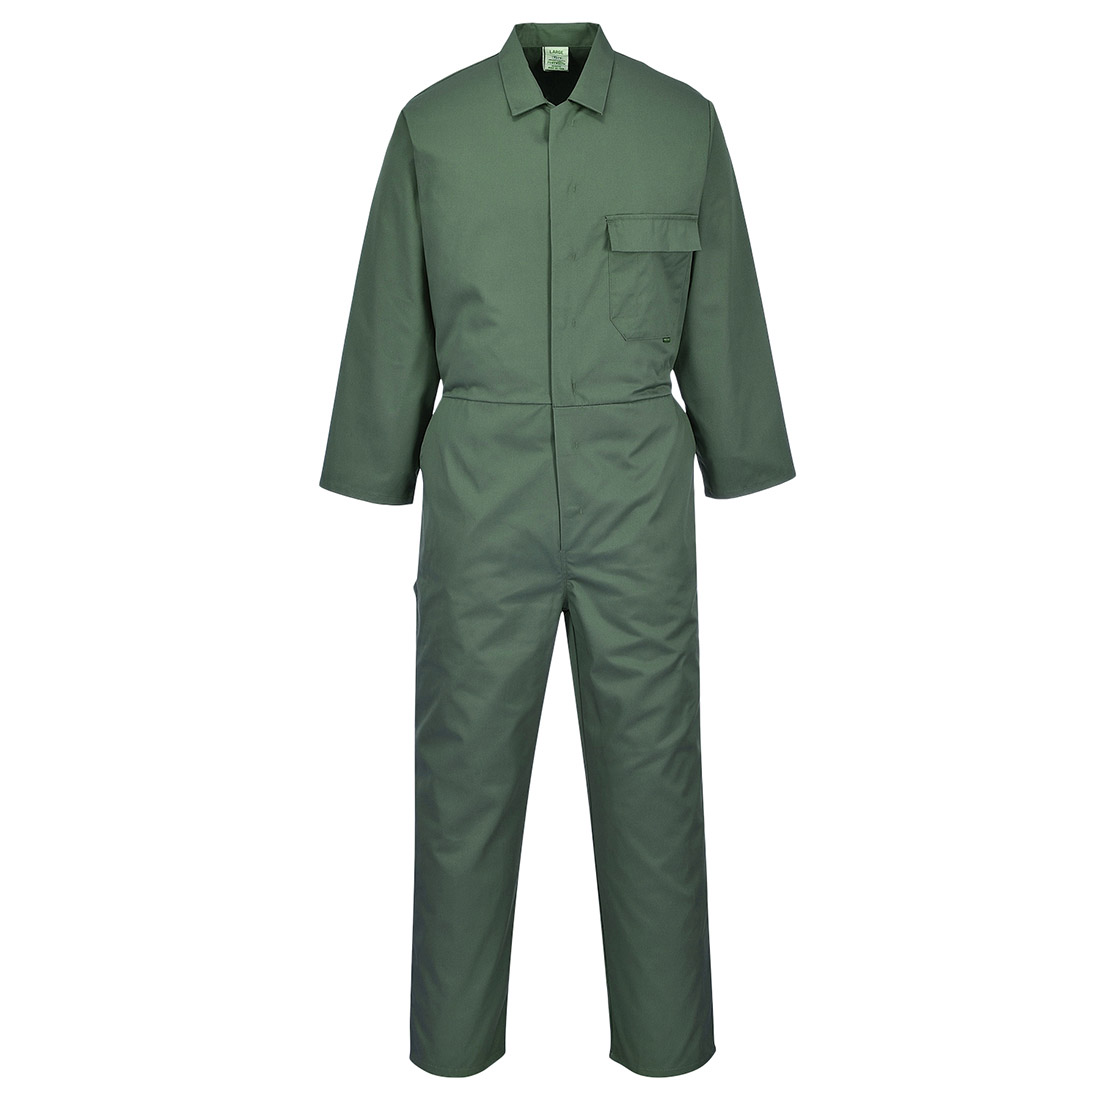 Polycotton Classic Industrial Standard Work Coverall